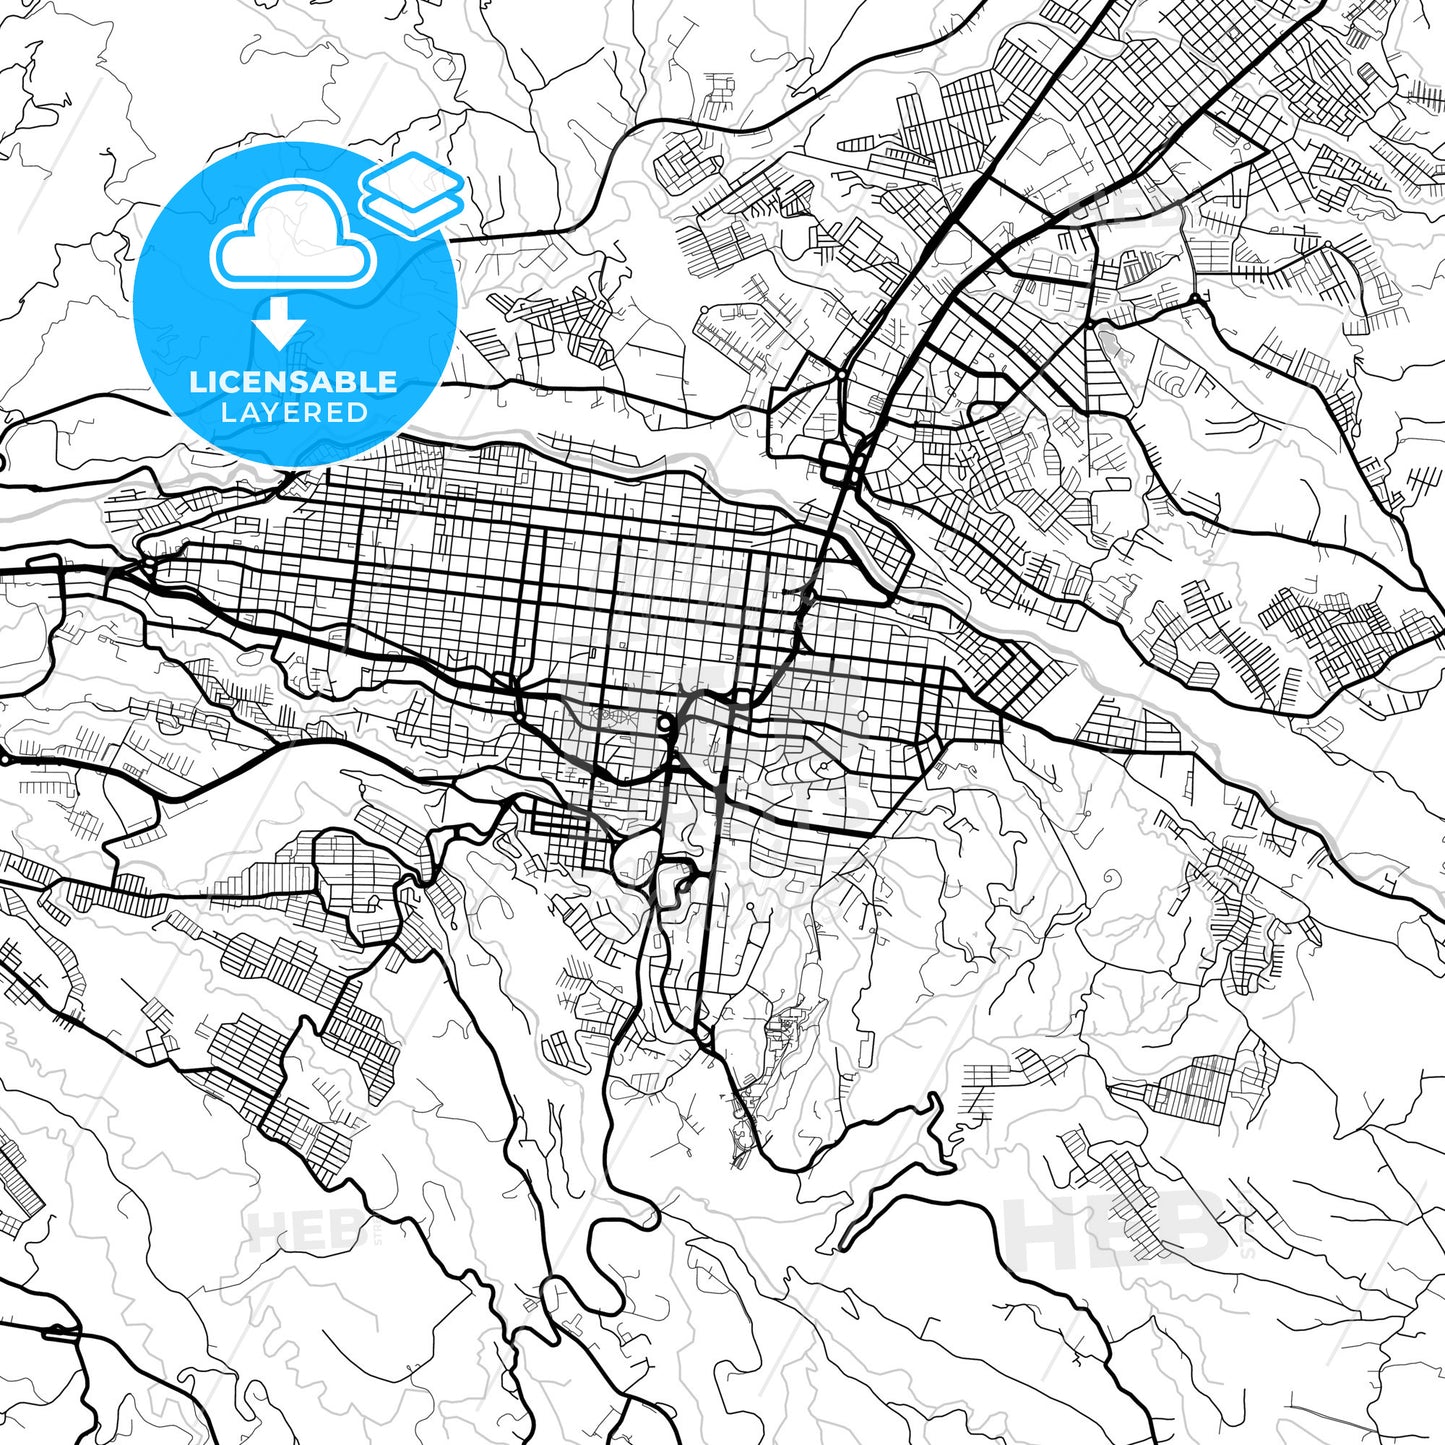 Layered PDF map of Pereira, Colombia